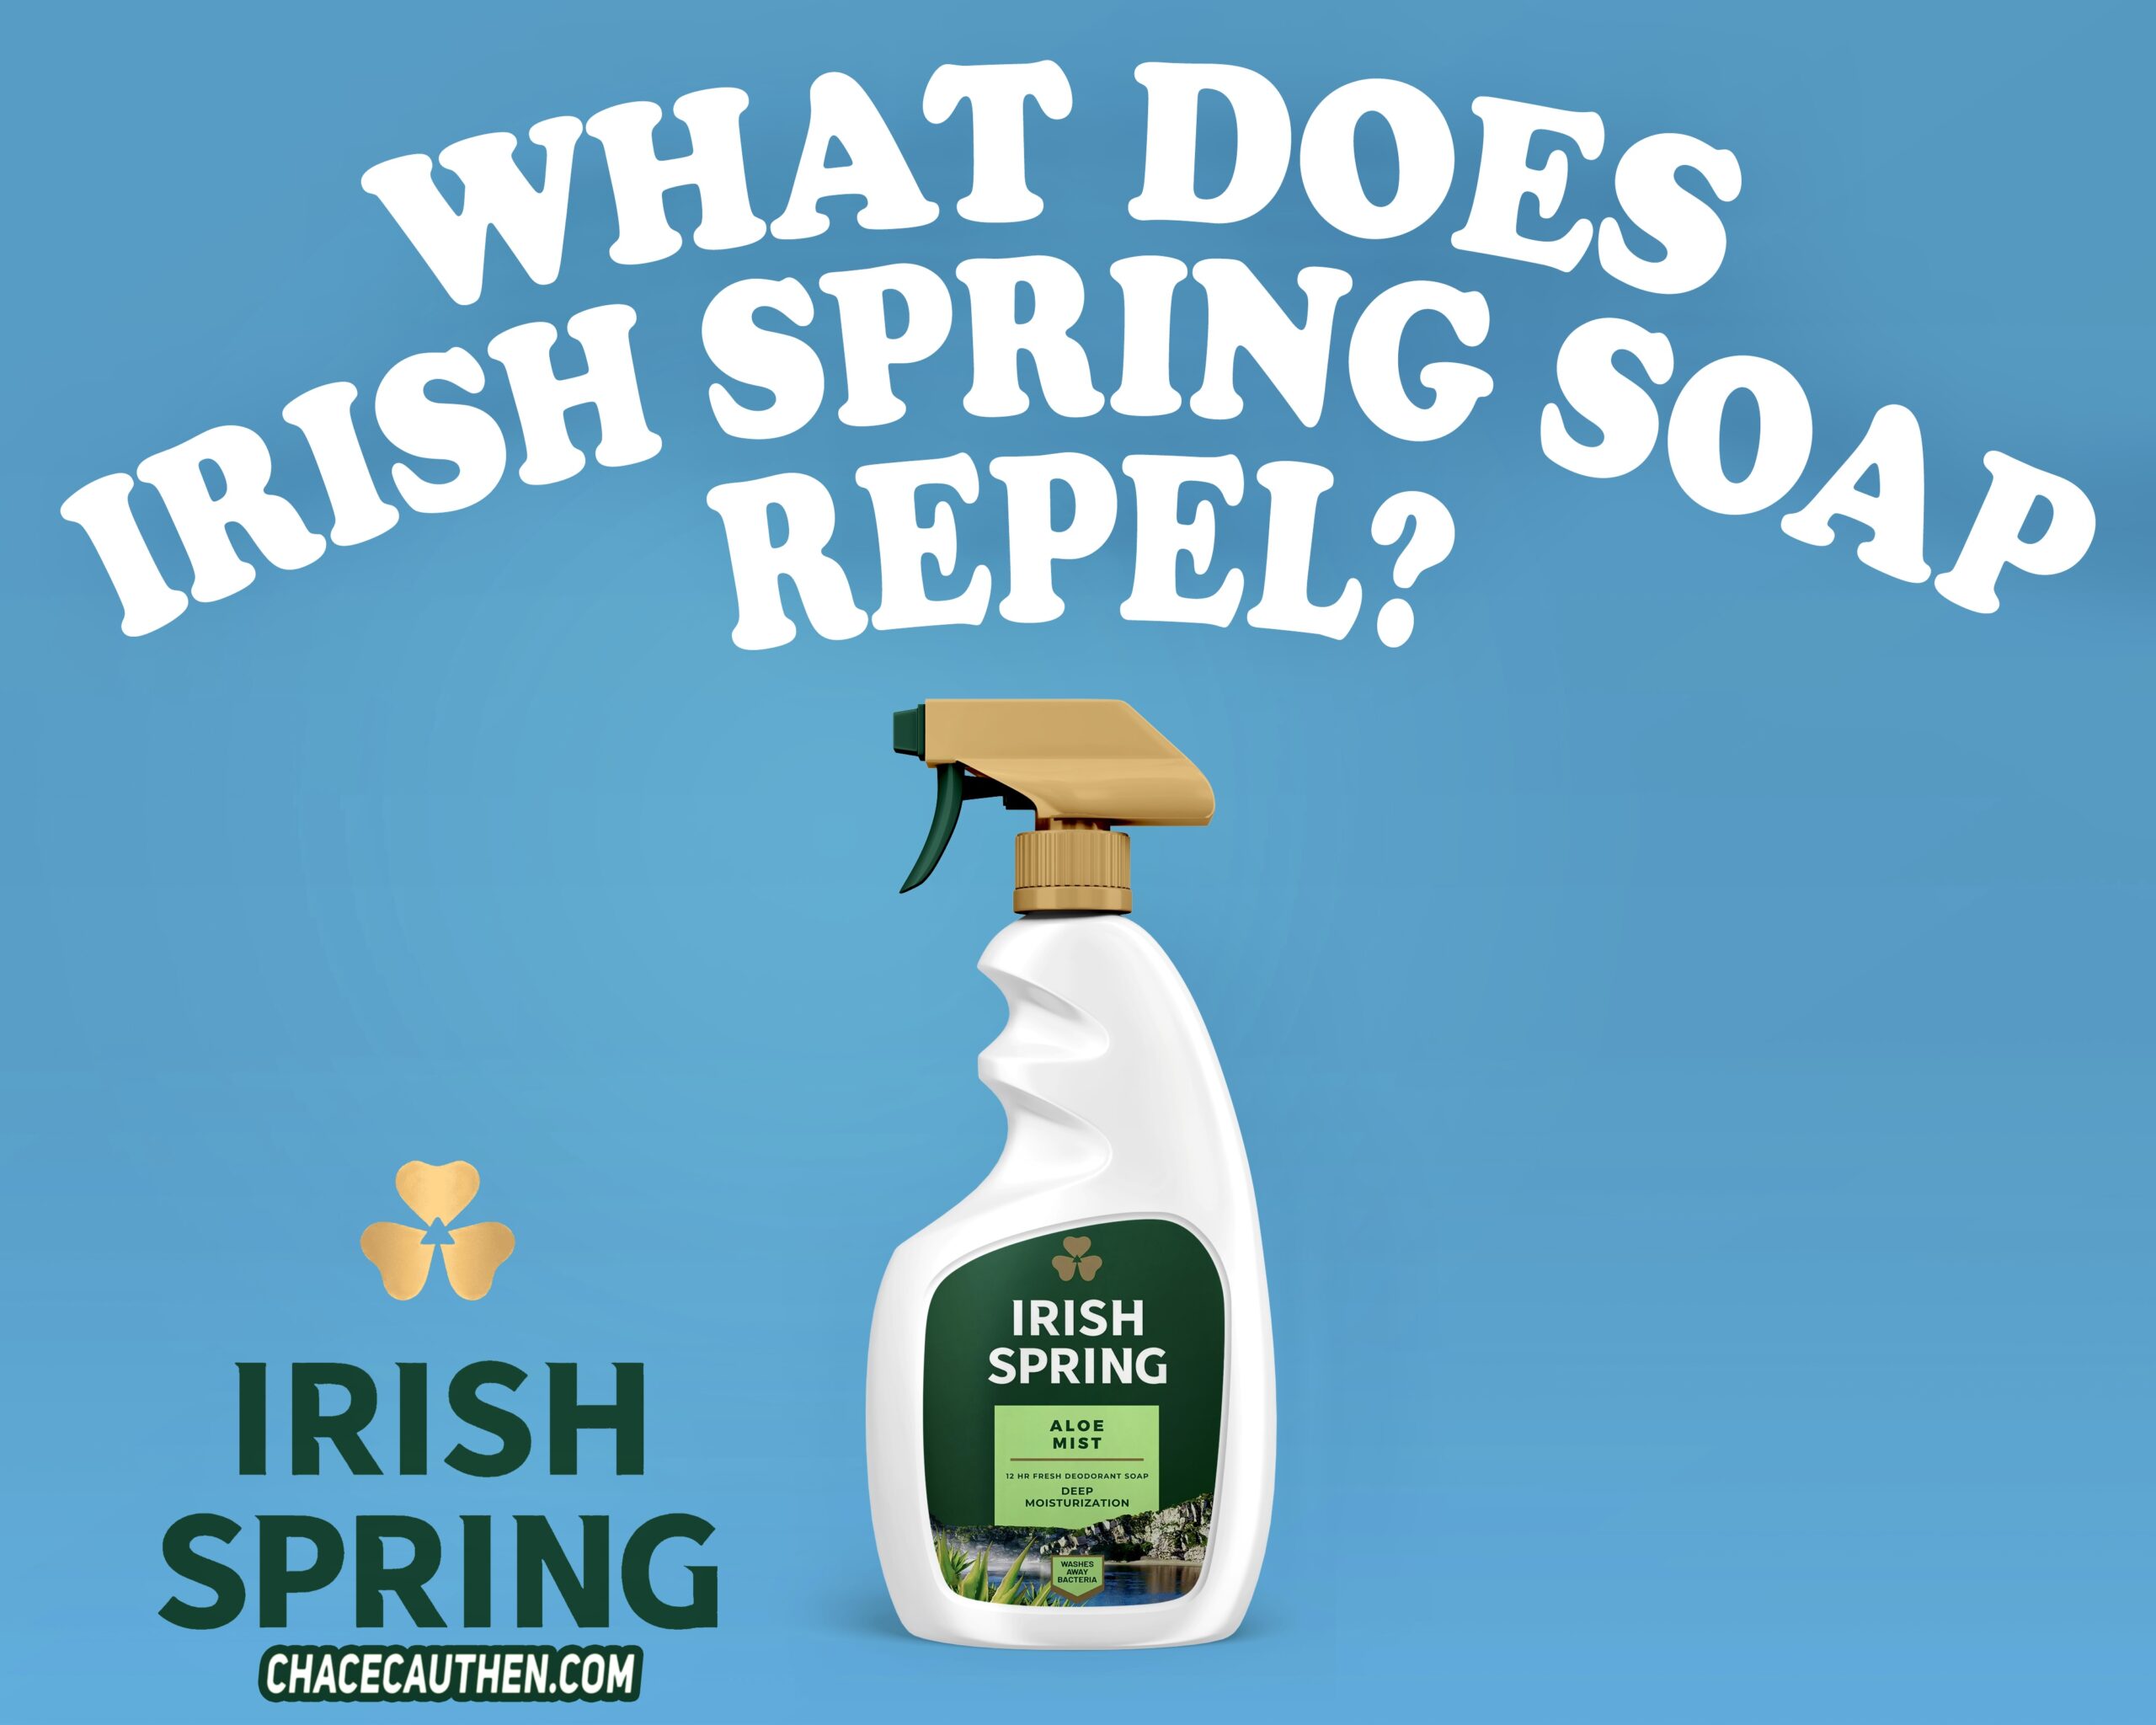 What Does Irish Spring Soap Repel? does irish spring repel mosquitoes? do irish spring soap keep mice away? does irish spring soap repel insects? does irish spring soap repel flies? Find these answers with Chace Cauthen ( Irish Spring Repellent bottle )